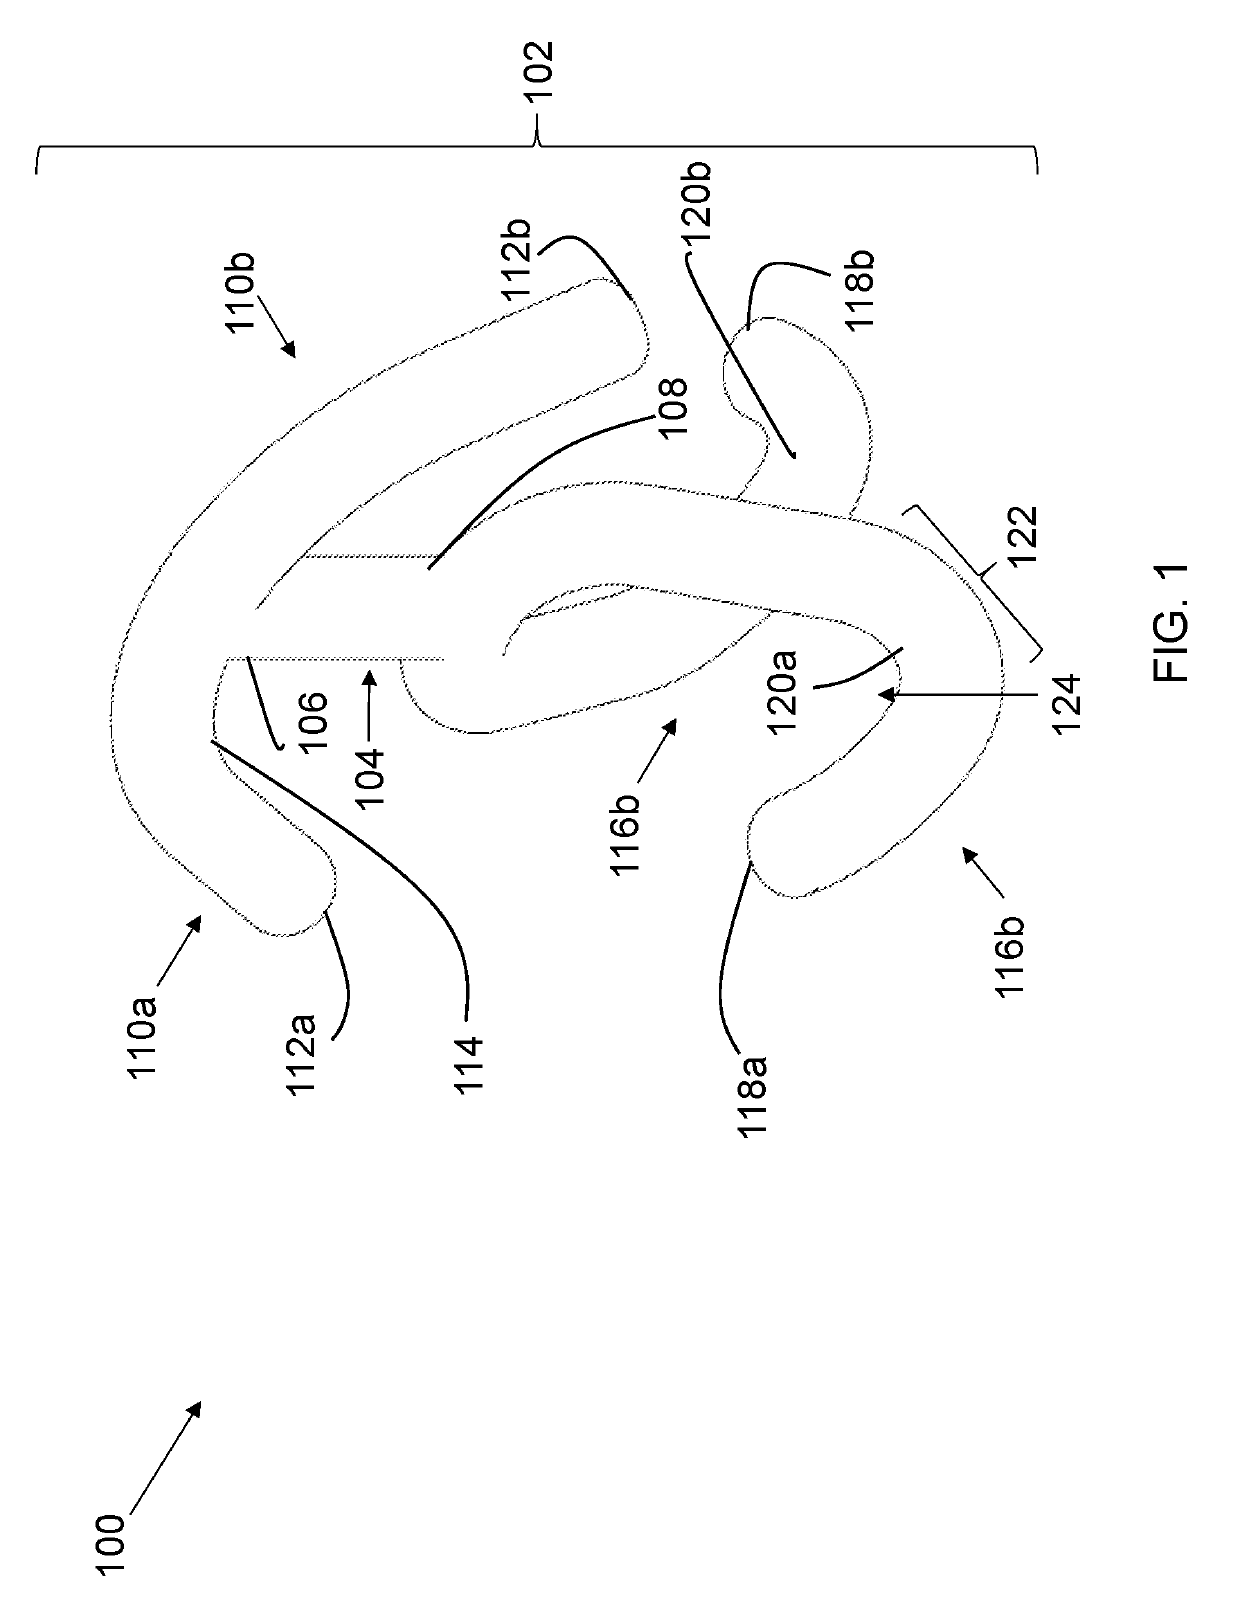 Tennis net anchoring device and method of anchoring a tennis net